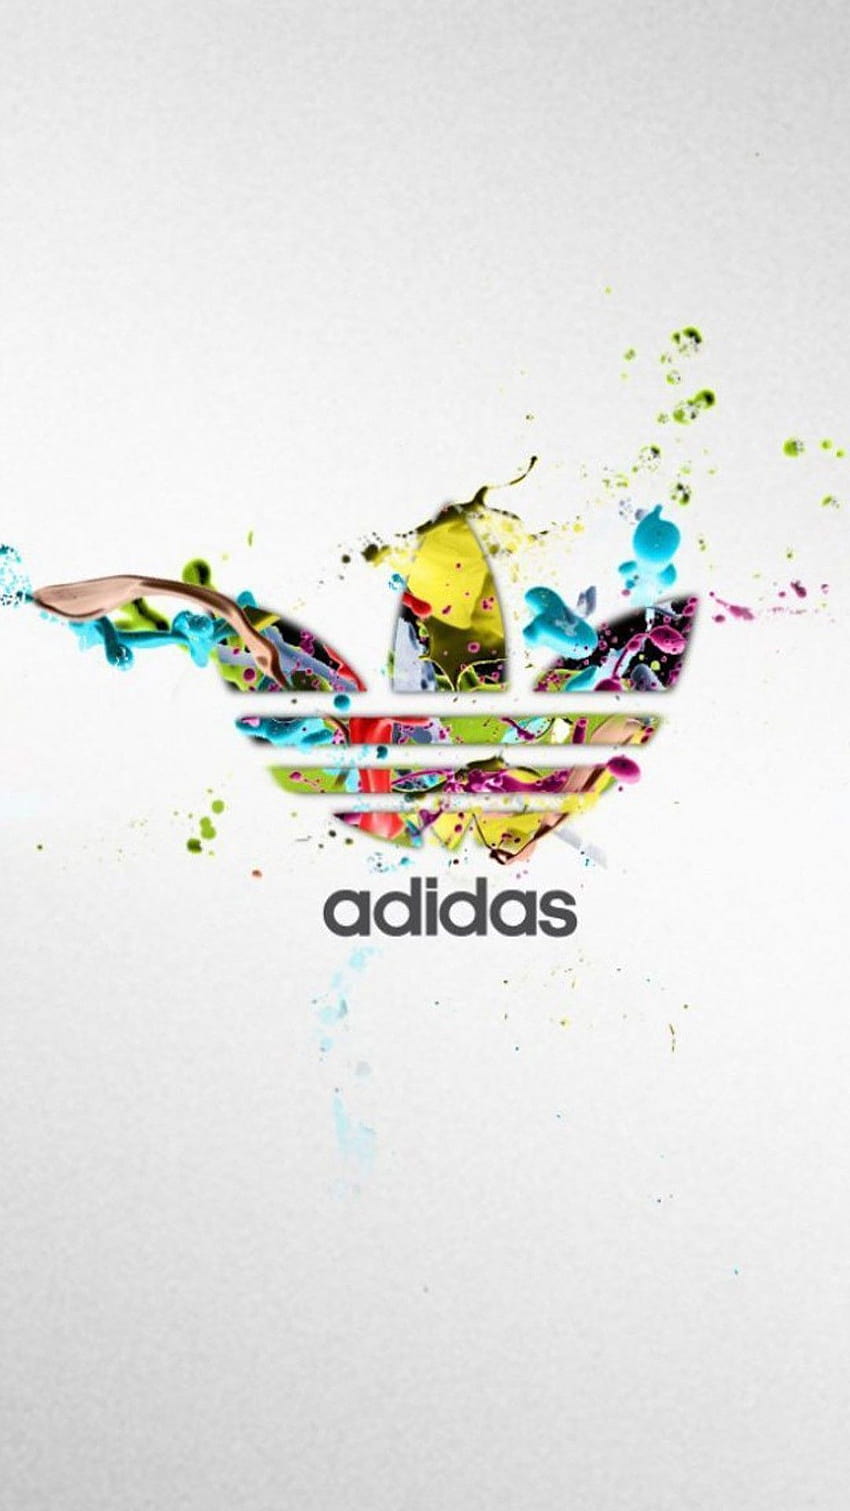 Adidas for mobile phone, tablet, computer and other devices and wallpa…, iphone adidas HD phone wallpaper